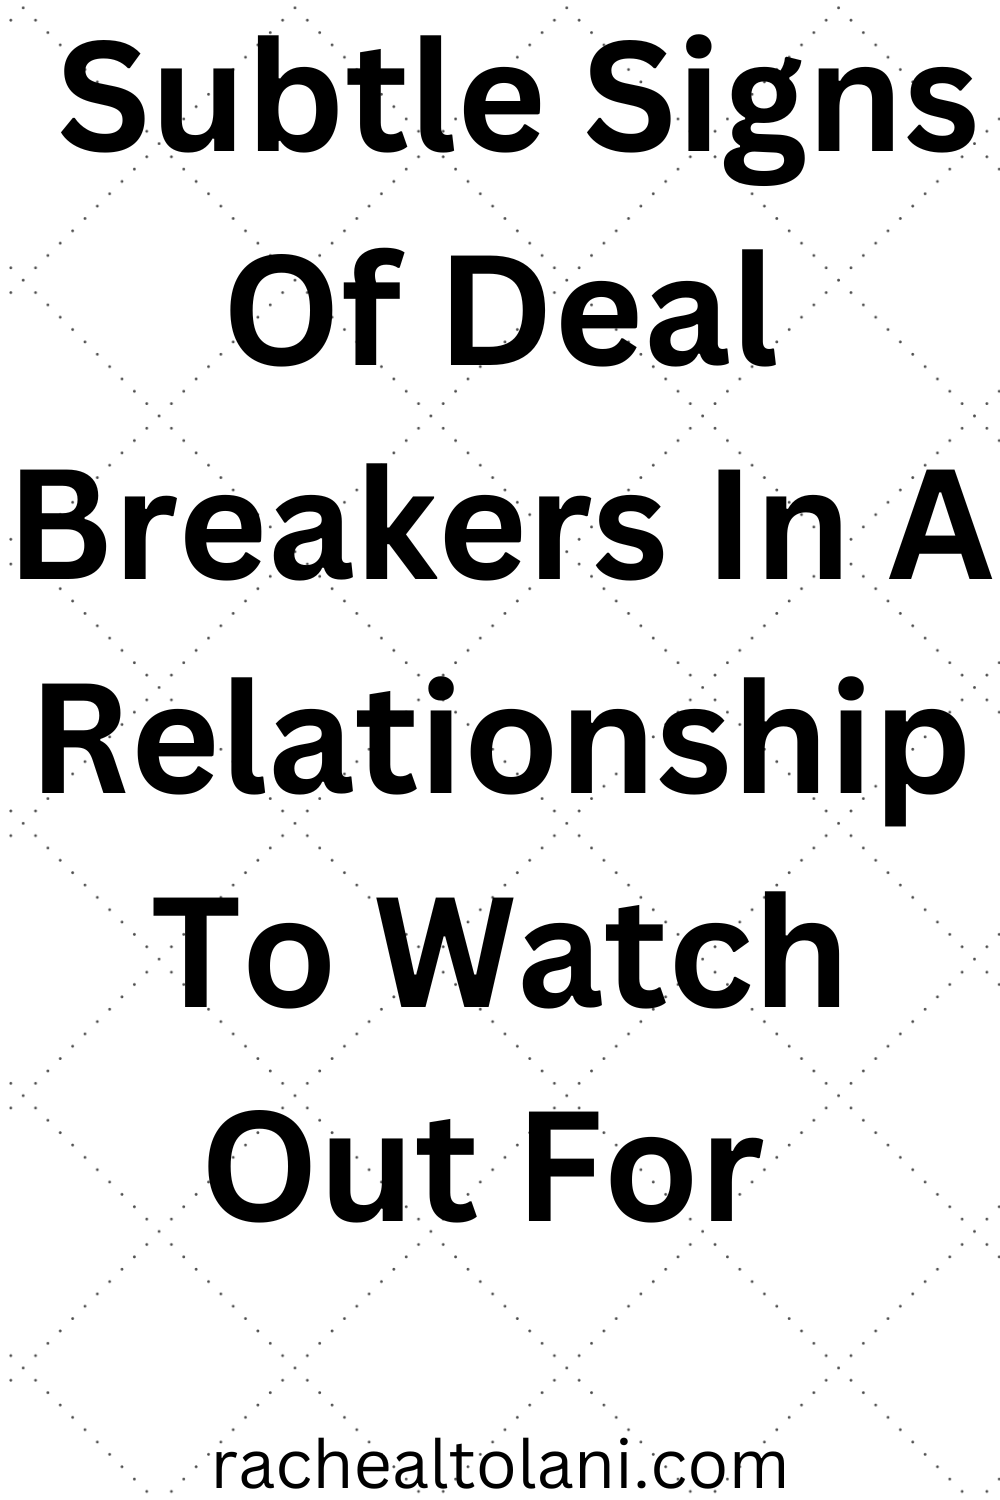 Deal breakers for relationship to watch out for